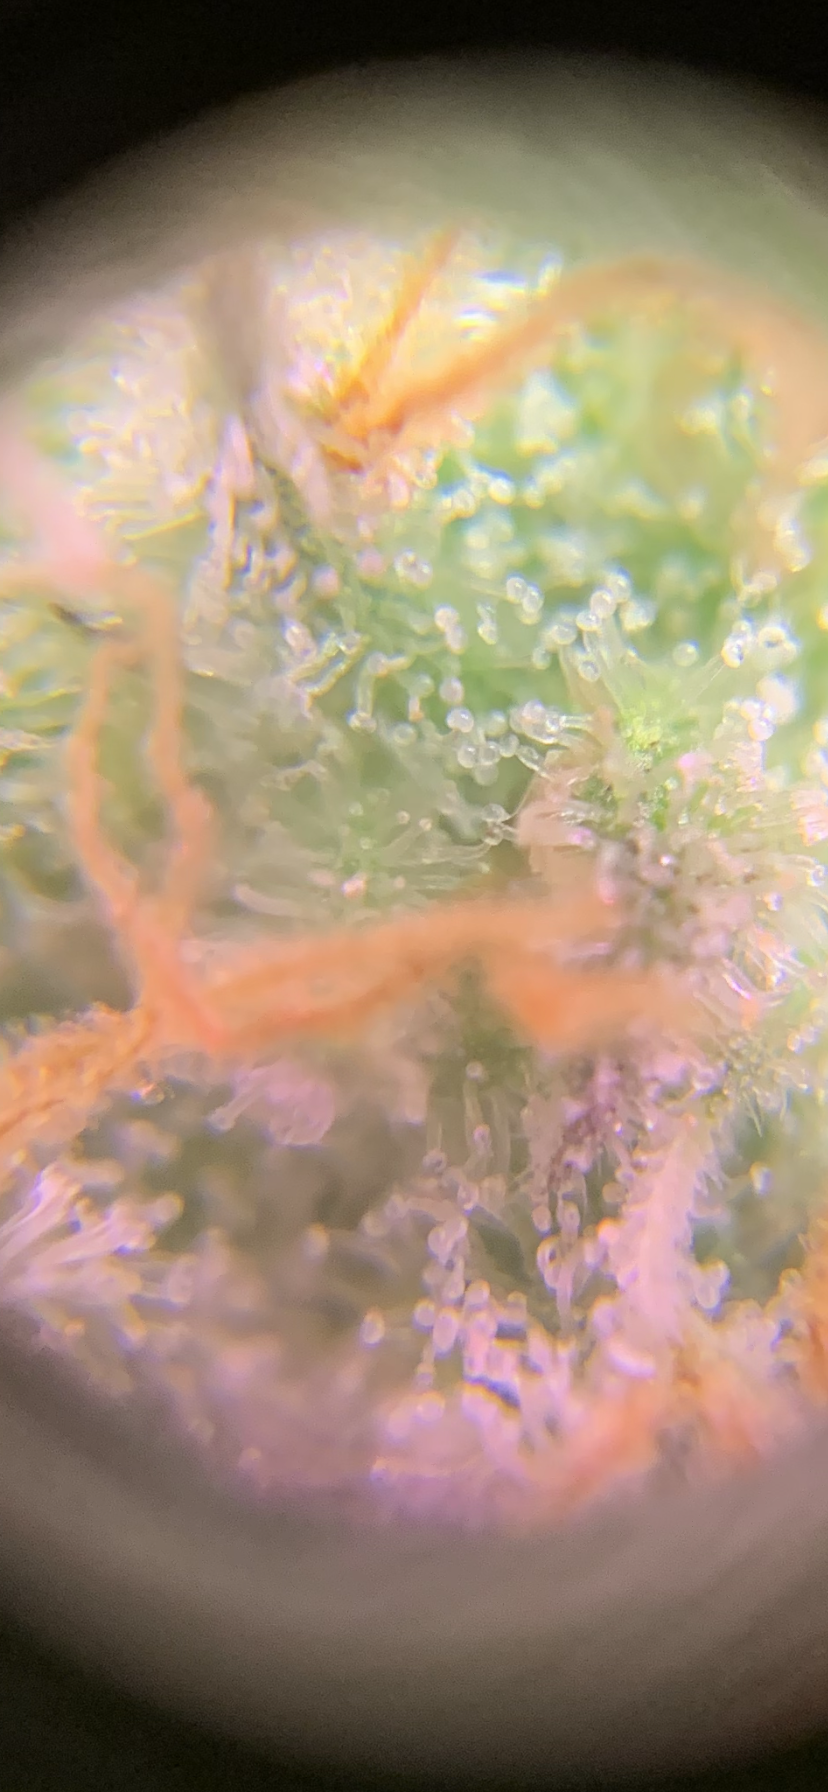 Trichomes look like they are turning a bit 4